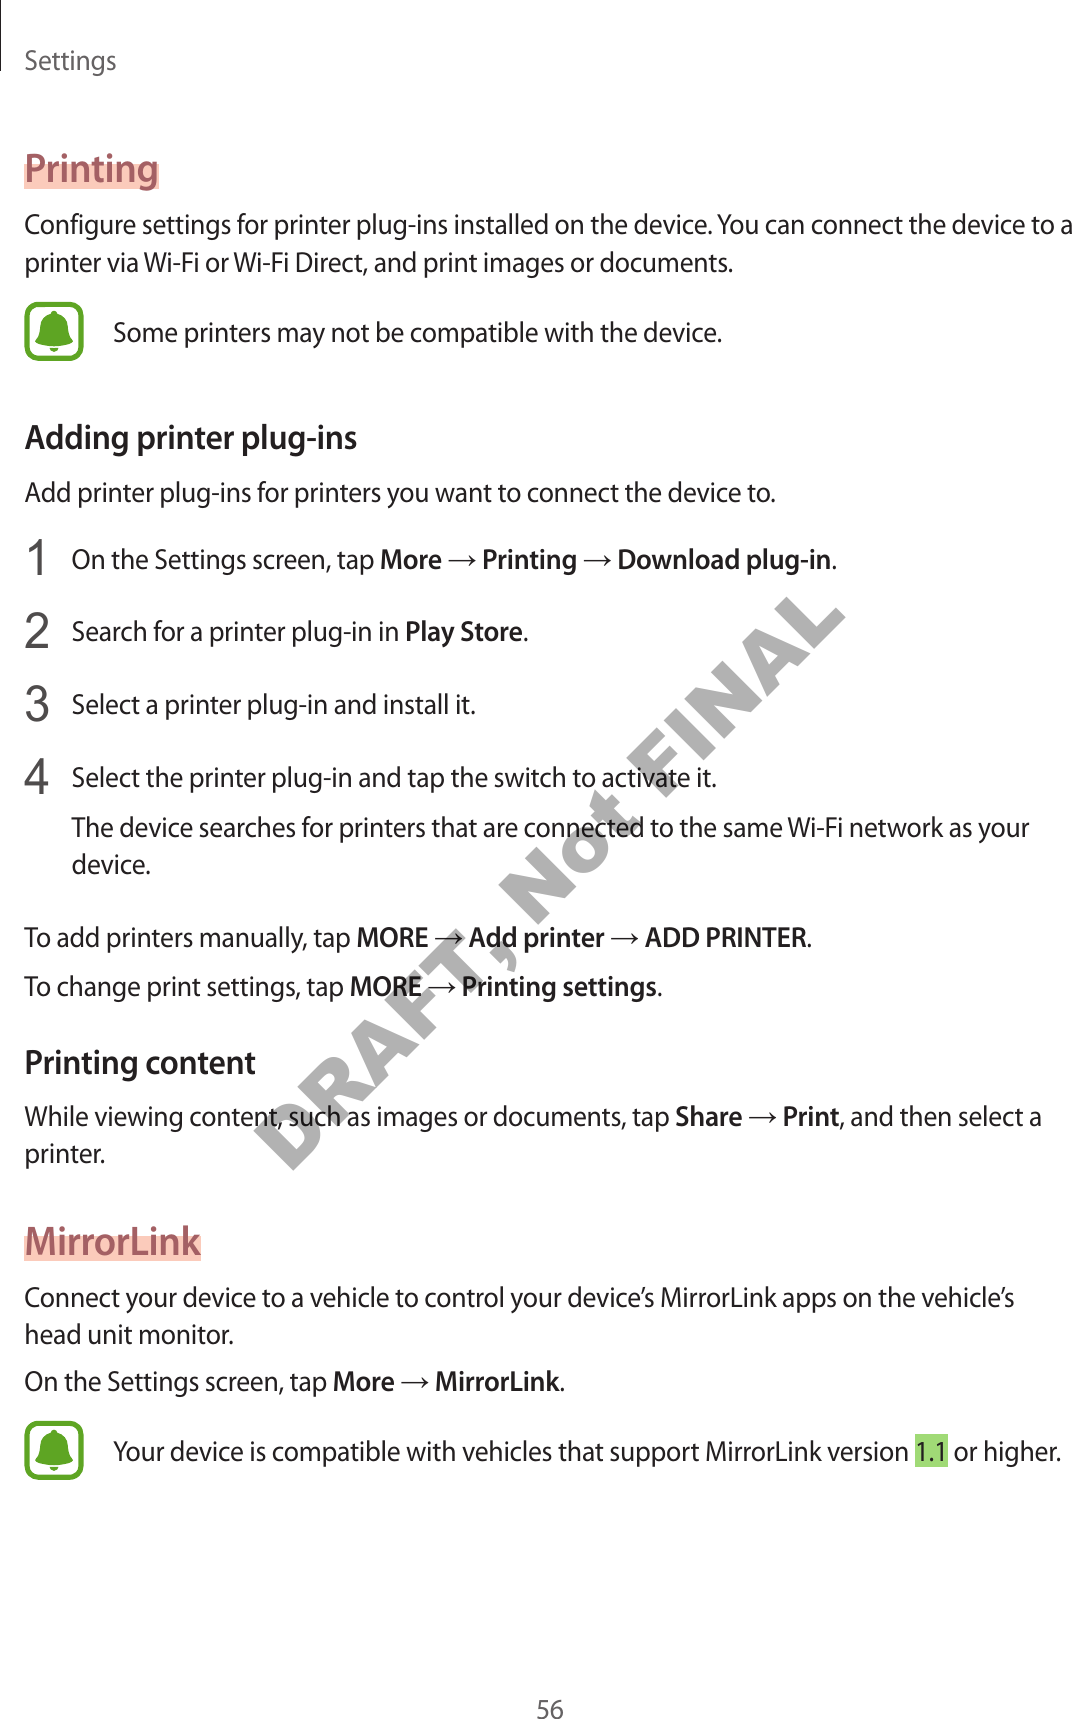 Settings56PrintingConfigur e settings f or print er plug-ins installed on the device. You can connect the device to a printer via Wi-Fi or  Wi-Fi Dir ect, and print images or documents .Some printers may not be compa tible with the device .Adding prin ter plug-insAdd print er plug-ins f or printers y ou w ant t o connect the device to.1  On the Settings screen, tap More → Printing → Download plug-in.2  Search for a print er plug-in in Play St or e.3  Select a printer plug-in and install it.4  Select the printer plug-in and tap the switch t o activate it.The device sear ches f or print ers that ar e c onnected to the same Wi-Fi network as y our device.To add printers manually, tap MORE → Add prin ter → ADD PRINTER.To change print settings, tap MORE → Printing settings.Prin ting c ont entWhile viewing cont ent , such as images or documents , tap Share → Print, and then select a printer.MirrorLinkConnect your device t o a v ehicle to c ontr ol y our devic e’s MirrorLink apps on the vehicle’s head unit monitor.On the Settings screen, tap More → MirrorLink.Your device is compatible with vehicles that support MirrorLink v ersion 1.1 or higher.DRAFT, Not FINAL